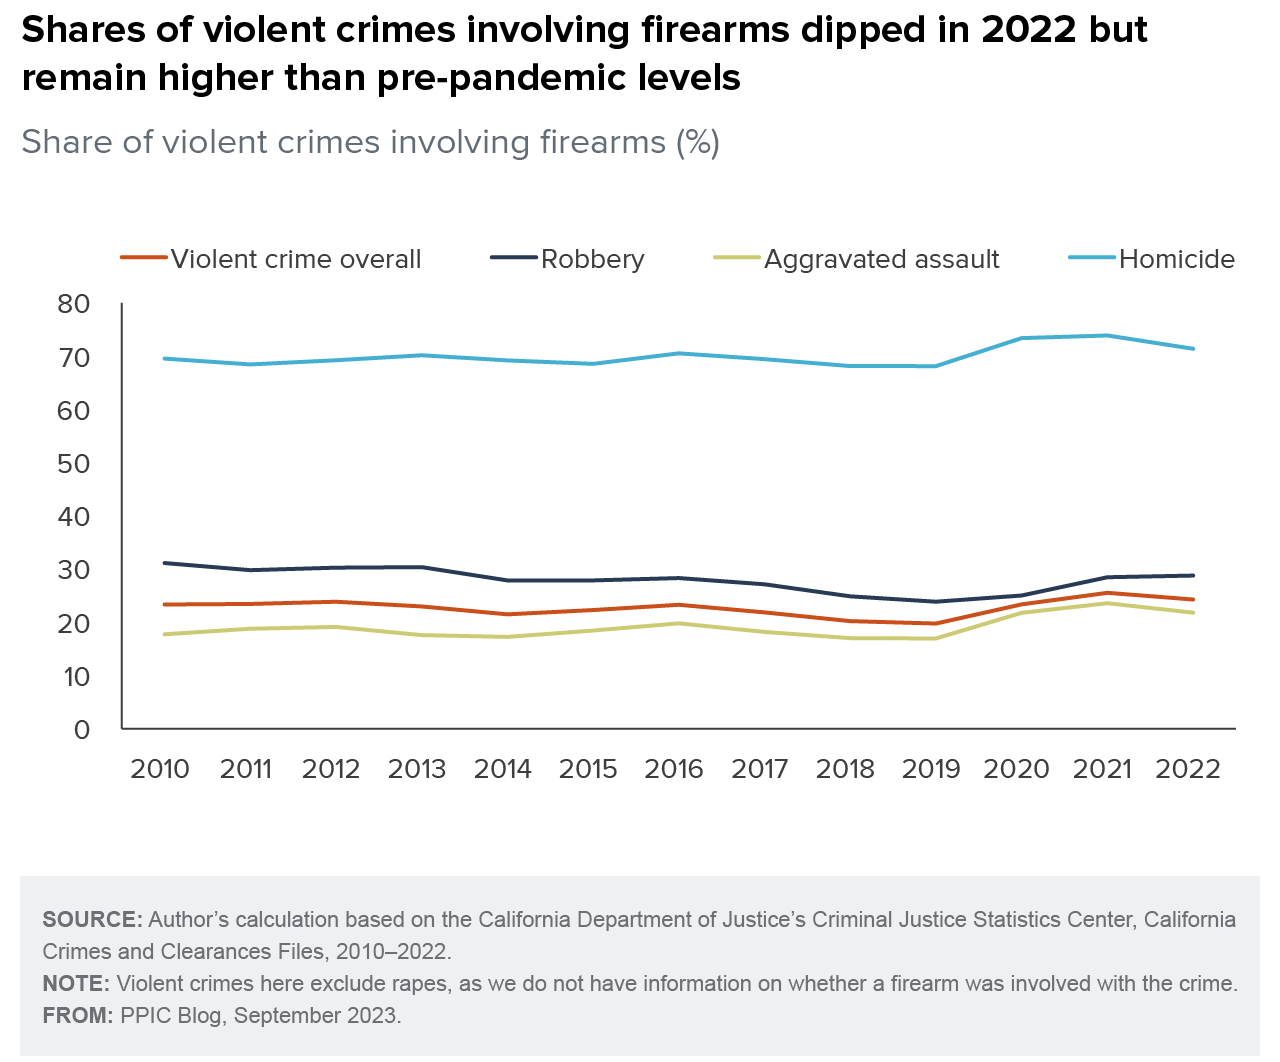 figure - Shares of violent crimes involving firearms dipped in 2022 but remain higher than pre-pandemic levels